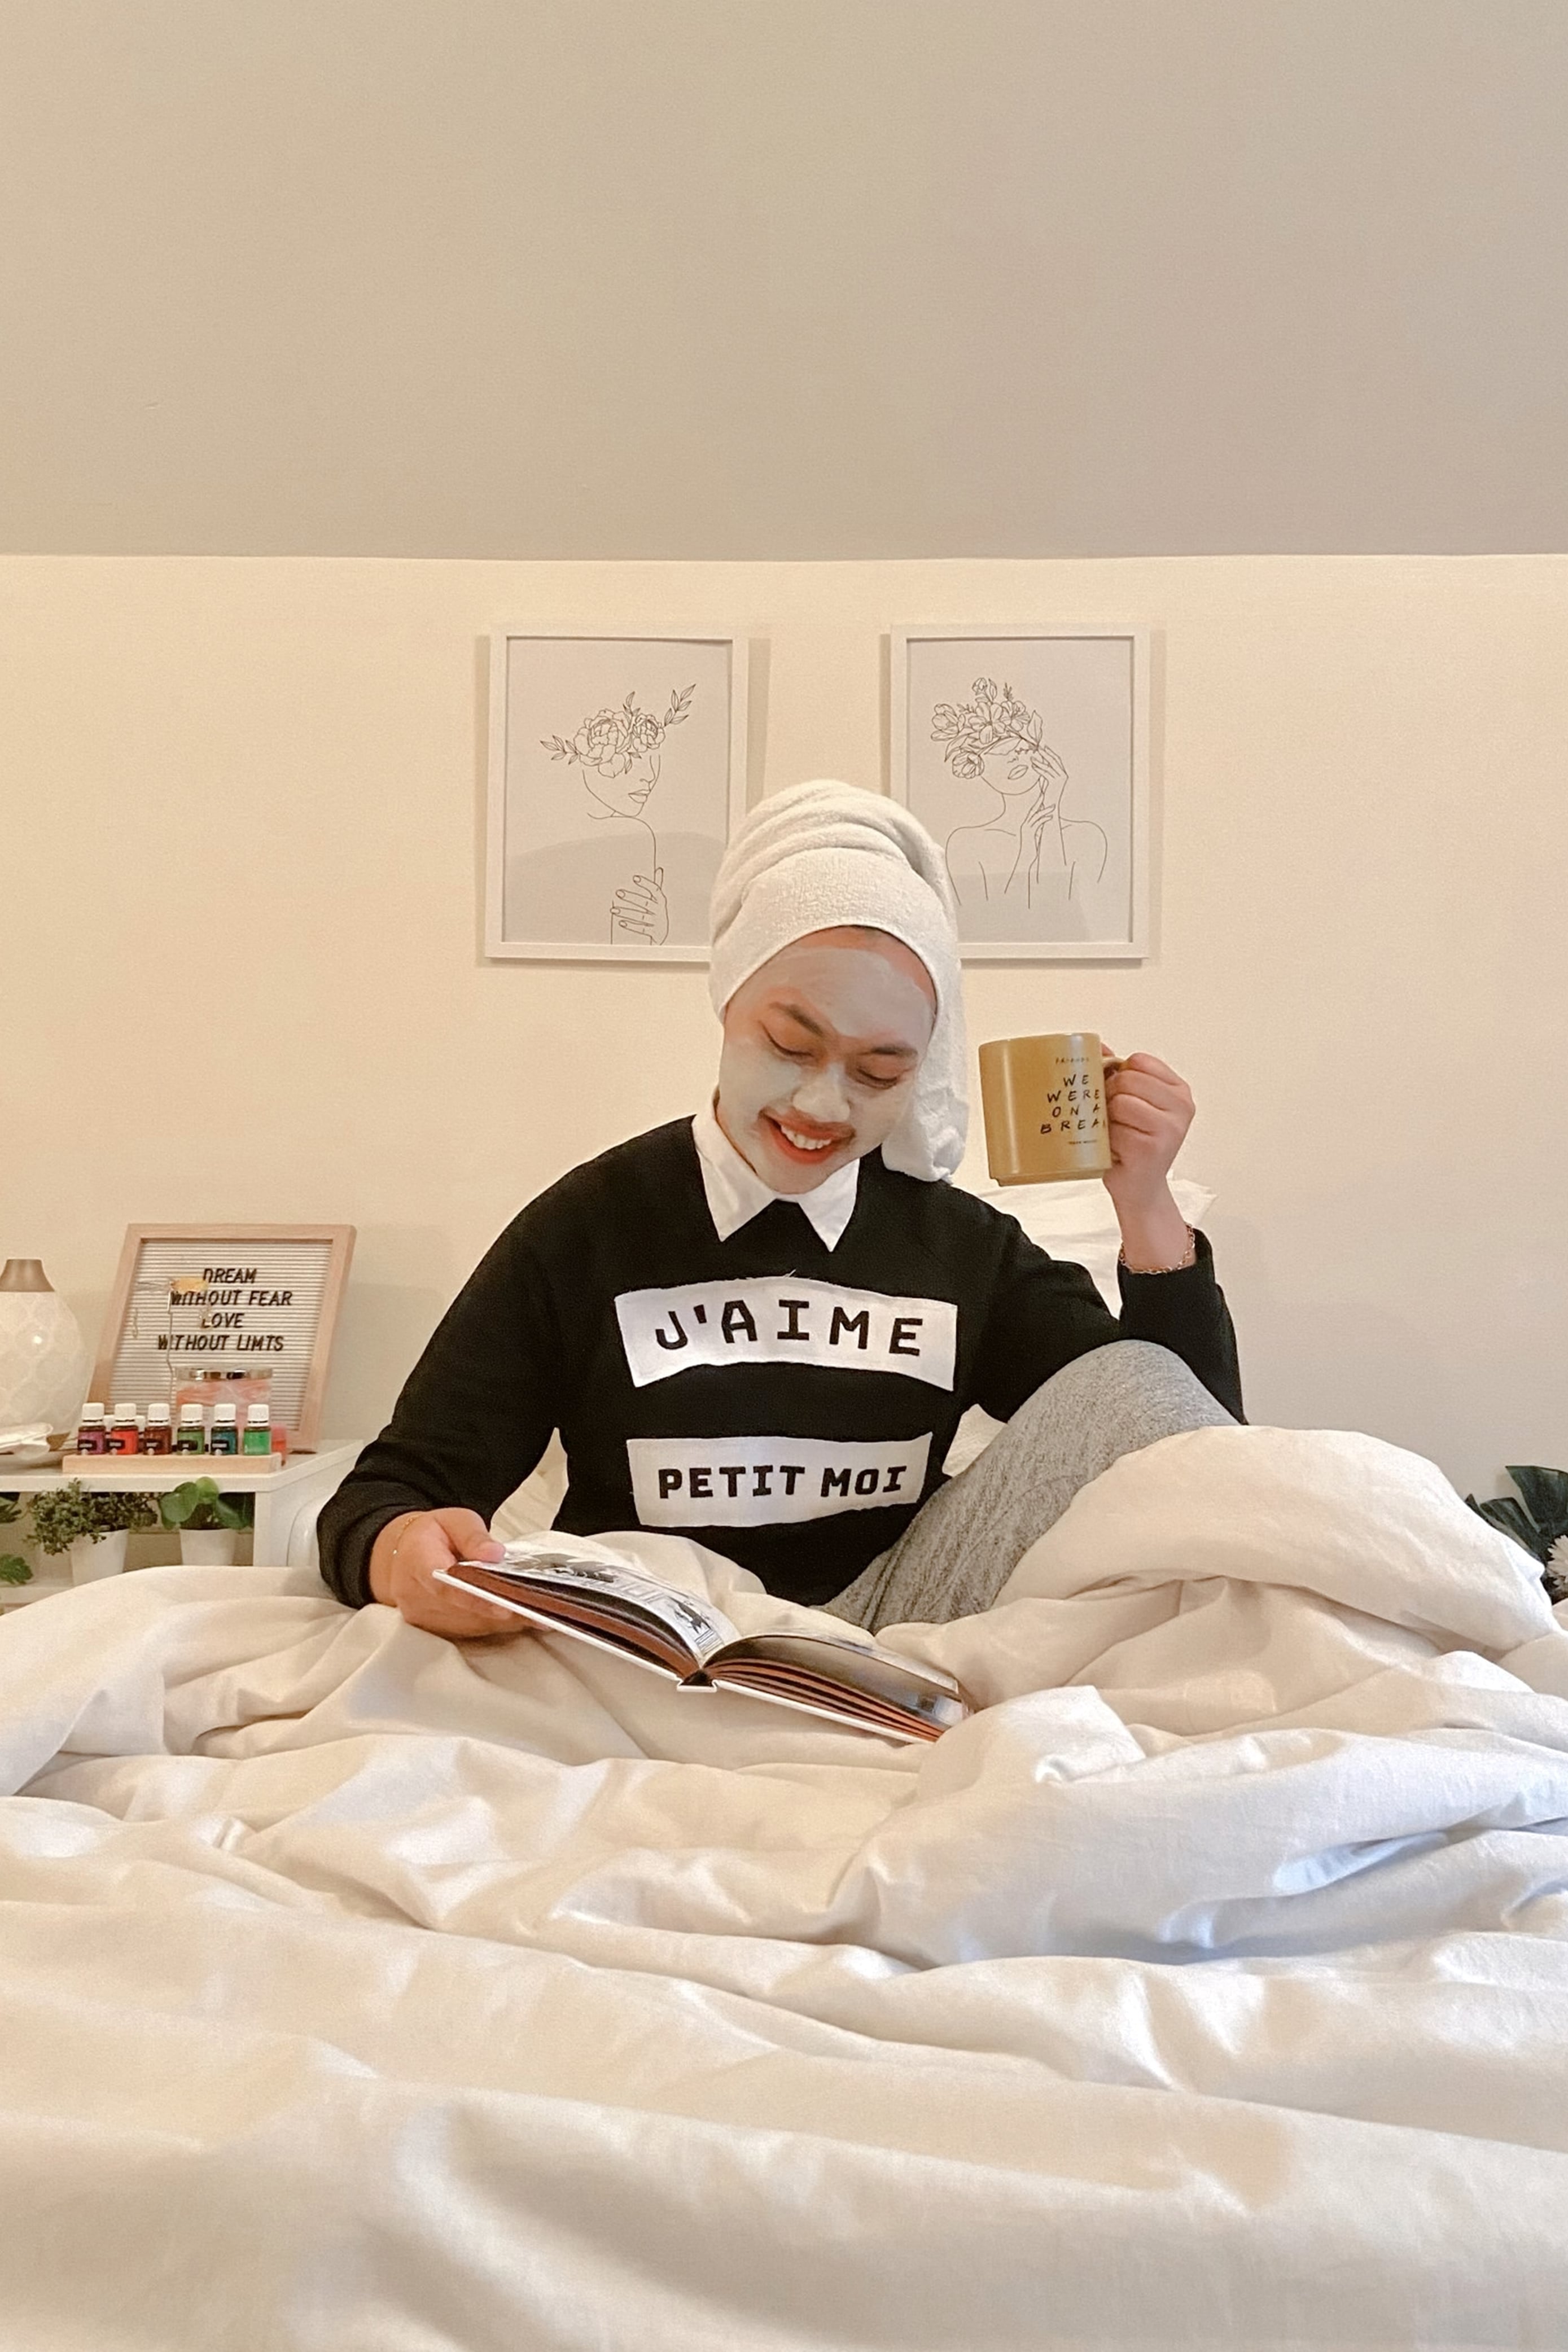 Female model in self-care mode. Wearing high quality black sweater made by petit moi. Sitting down on the bed with a cup of coffee and a book